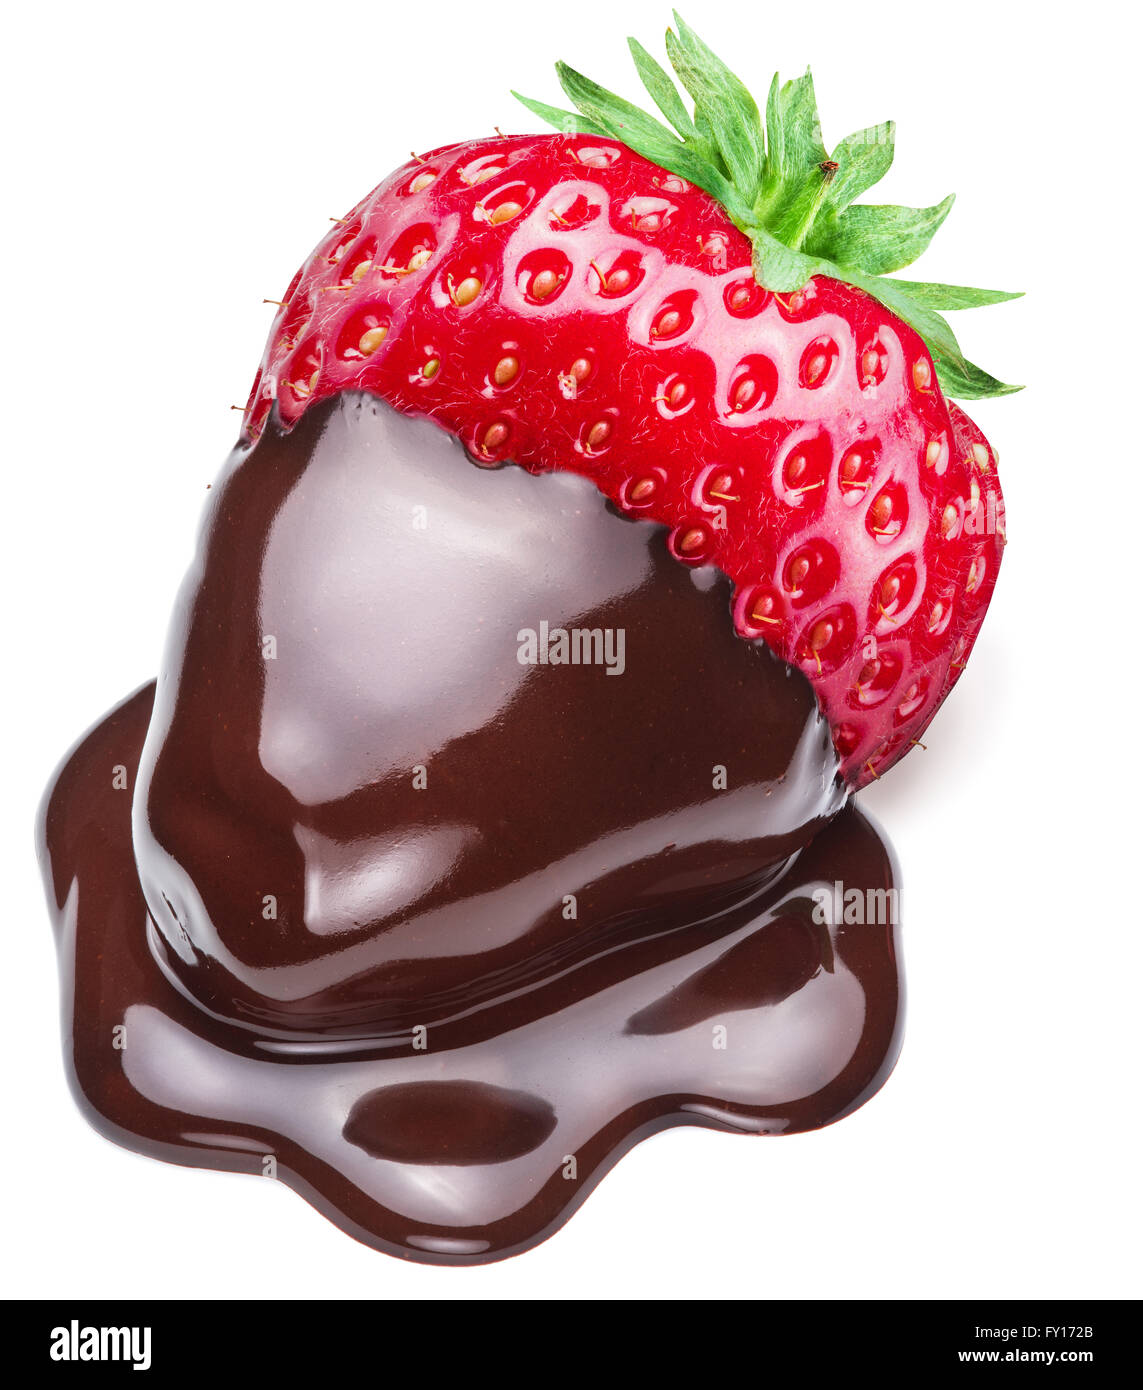 Strawberry dipped in chocolate fondue on white background. Stock Photo